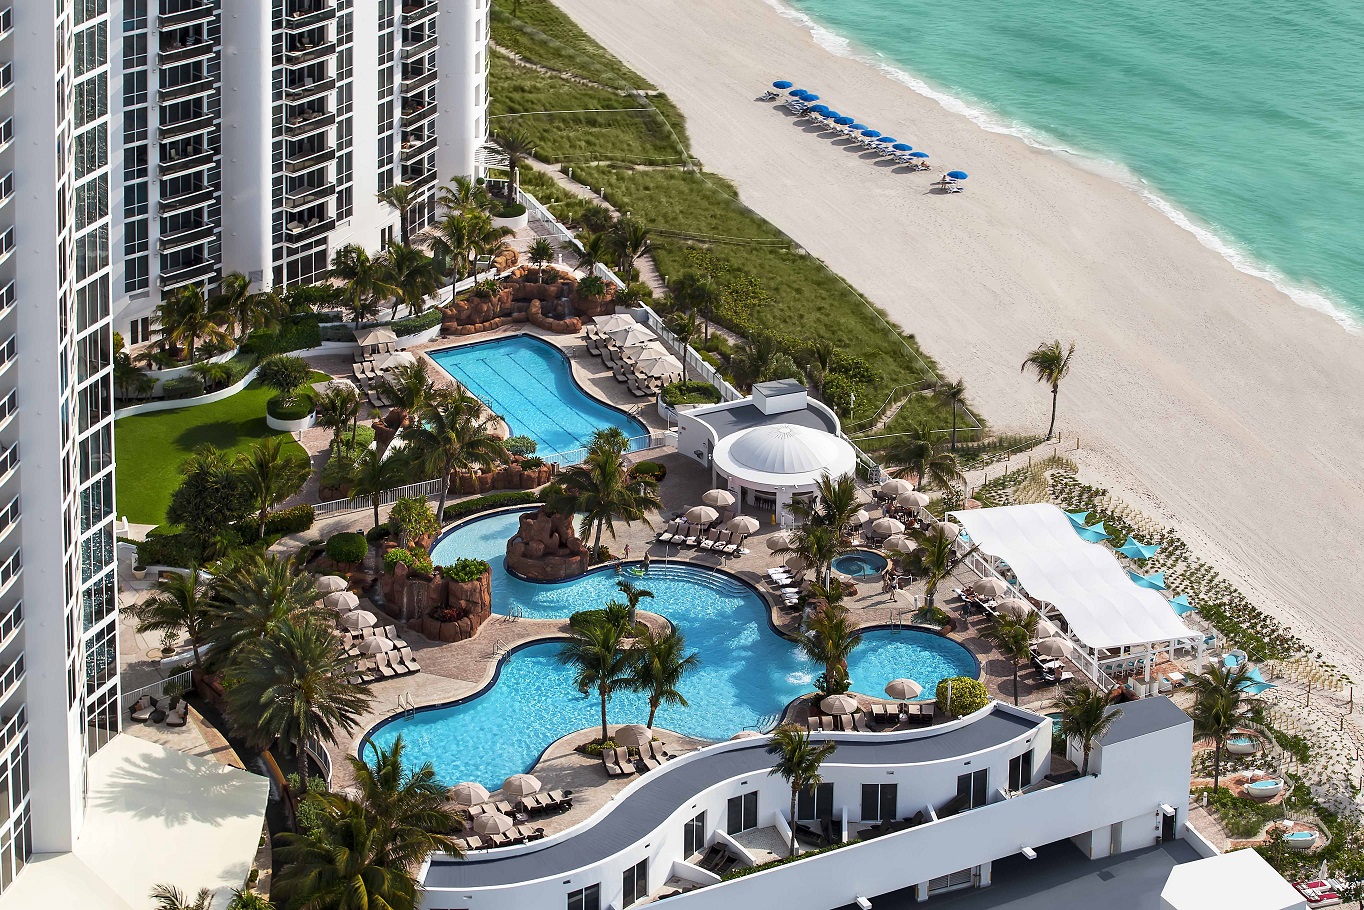 Trump Miami features tranquil pool and ocean views from private balconies